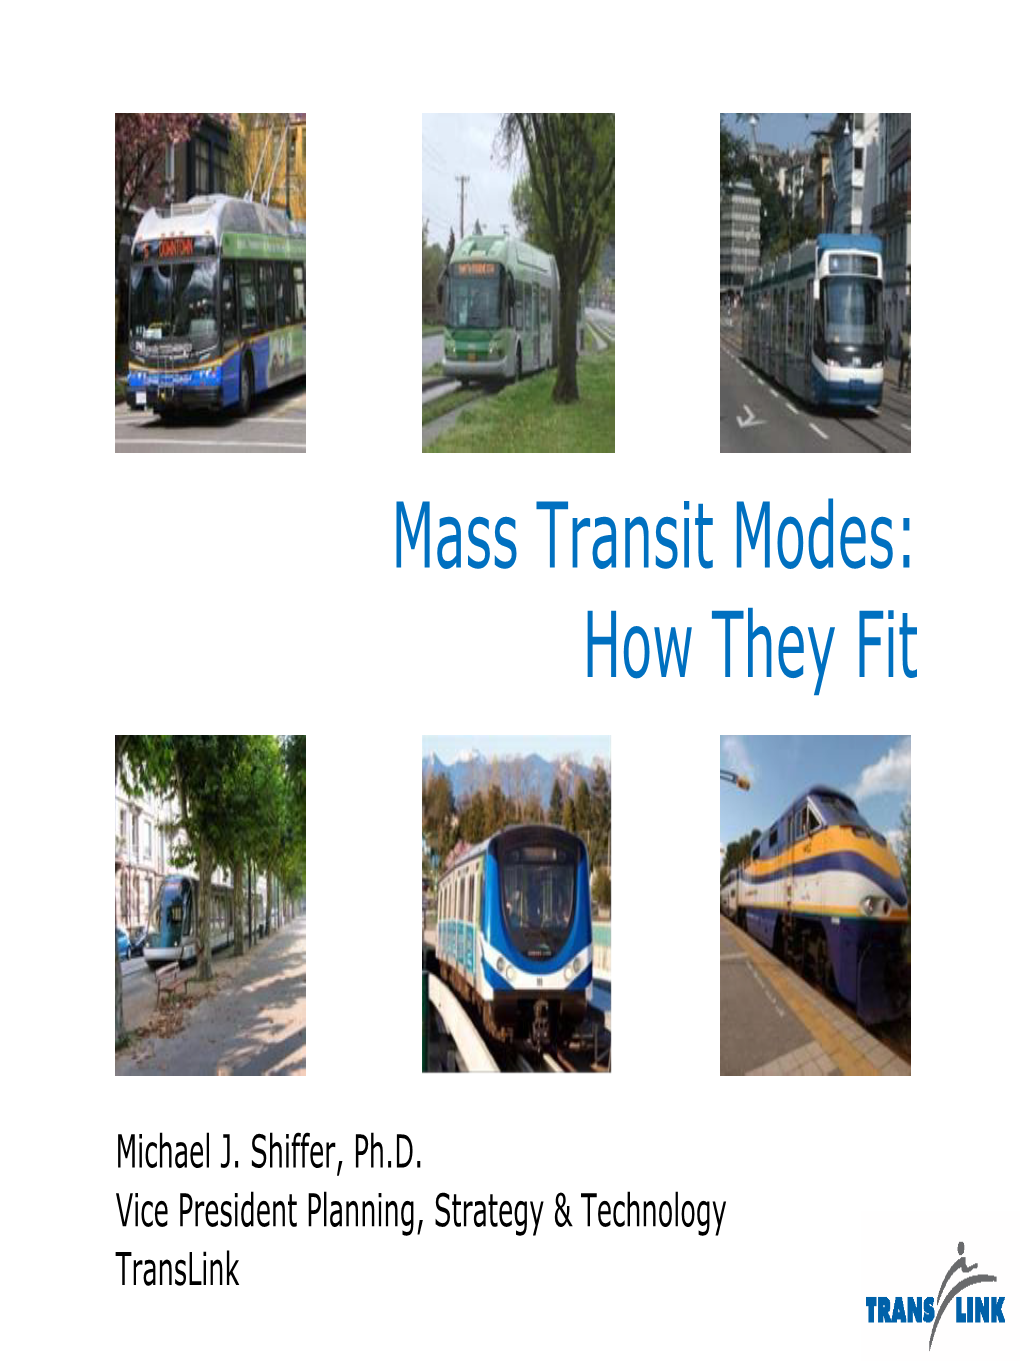 Mass Transit Modes: How They Fit